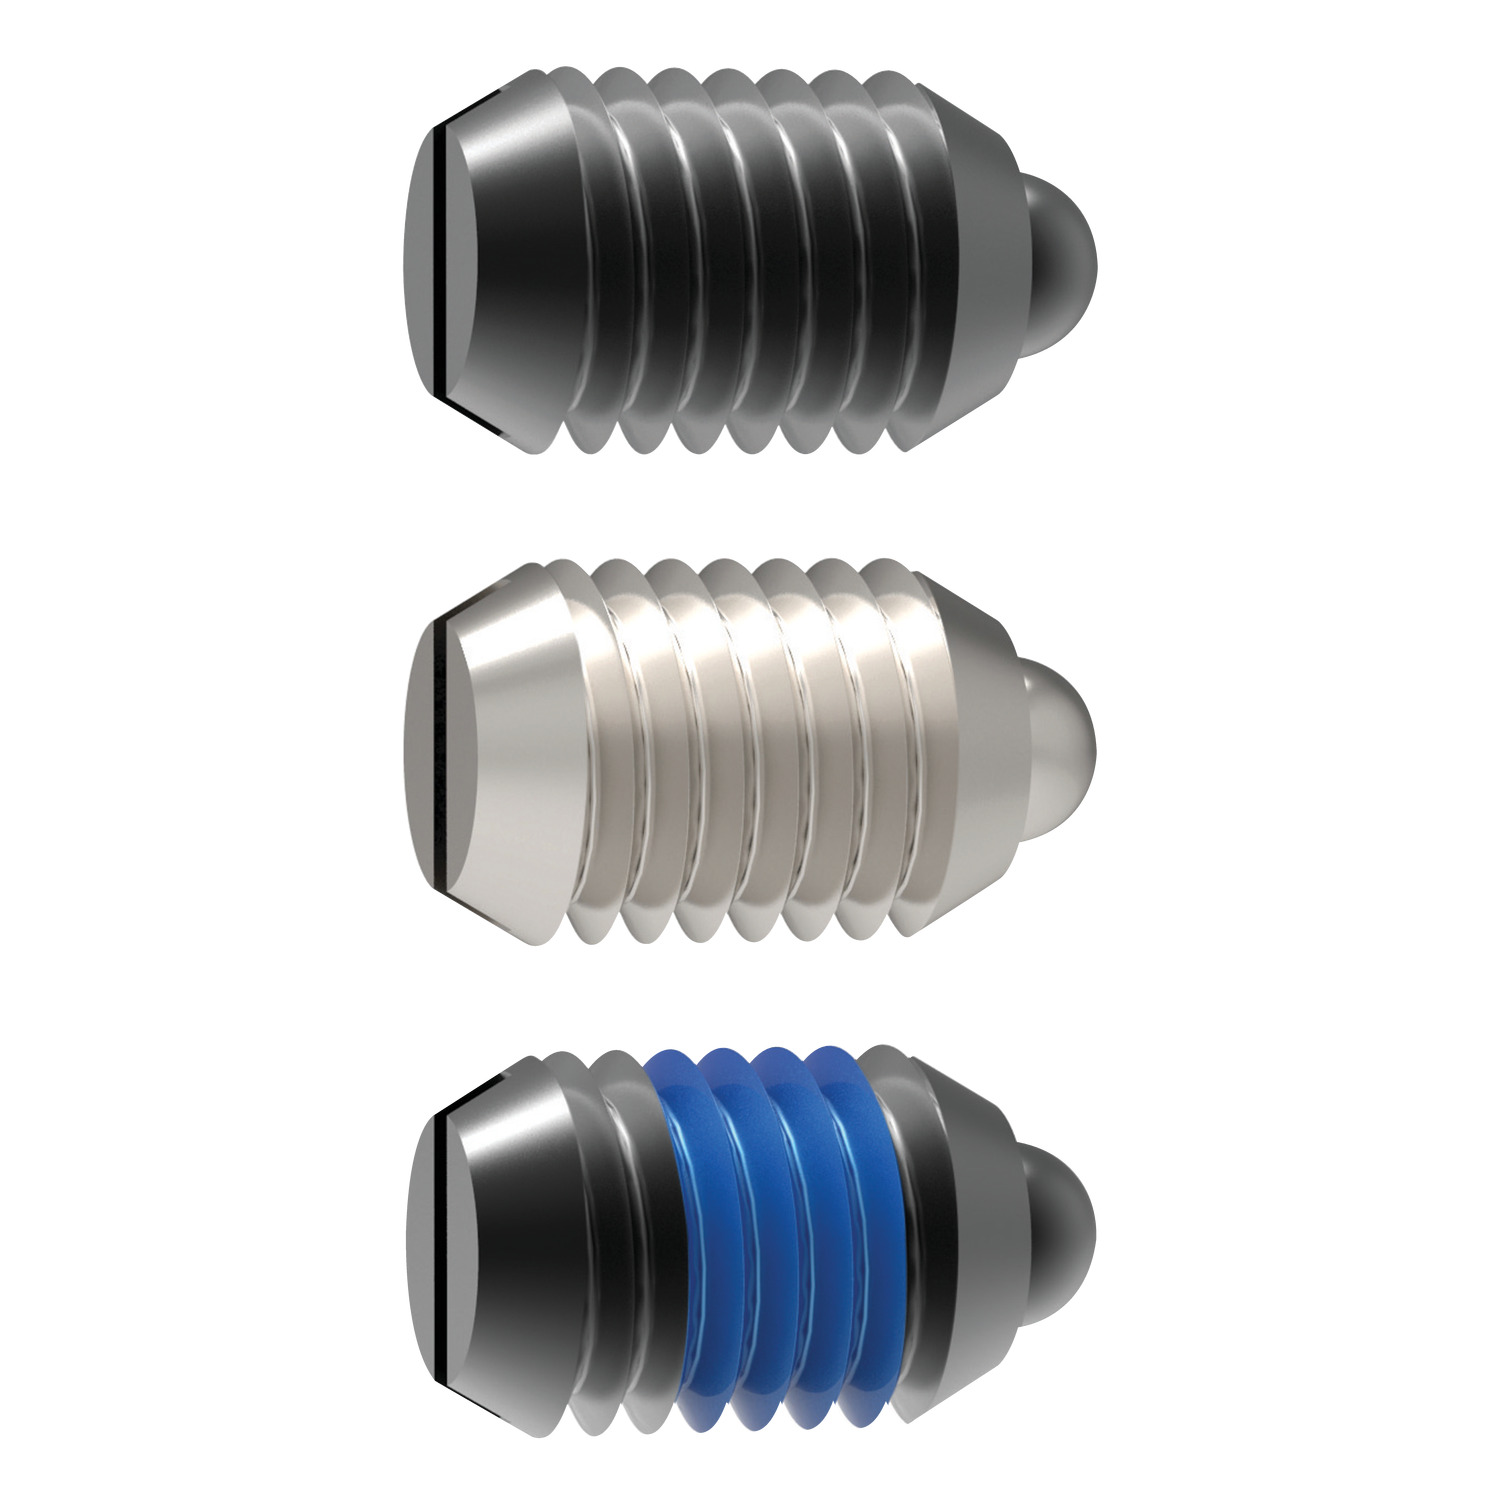 Spring Plungers - IMPERIAL Round end pin and slot spring plungers with imperial sizing. Available in stainless steel or steel. Spring loads are marked with lines, special types are available on request.